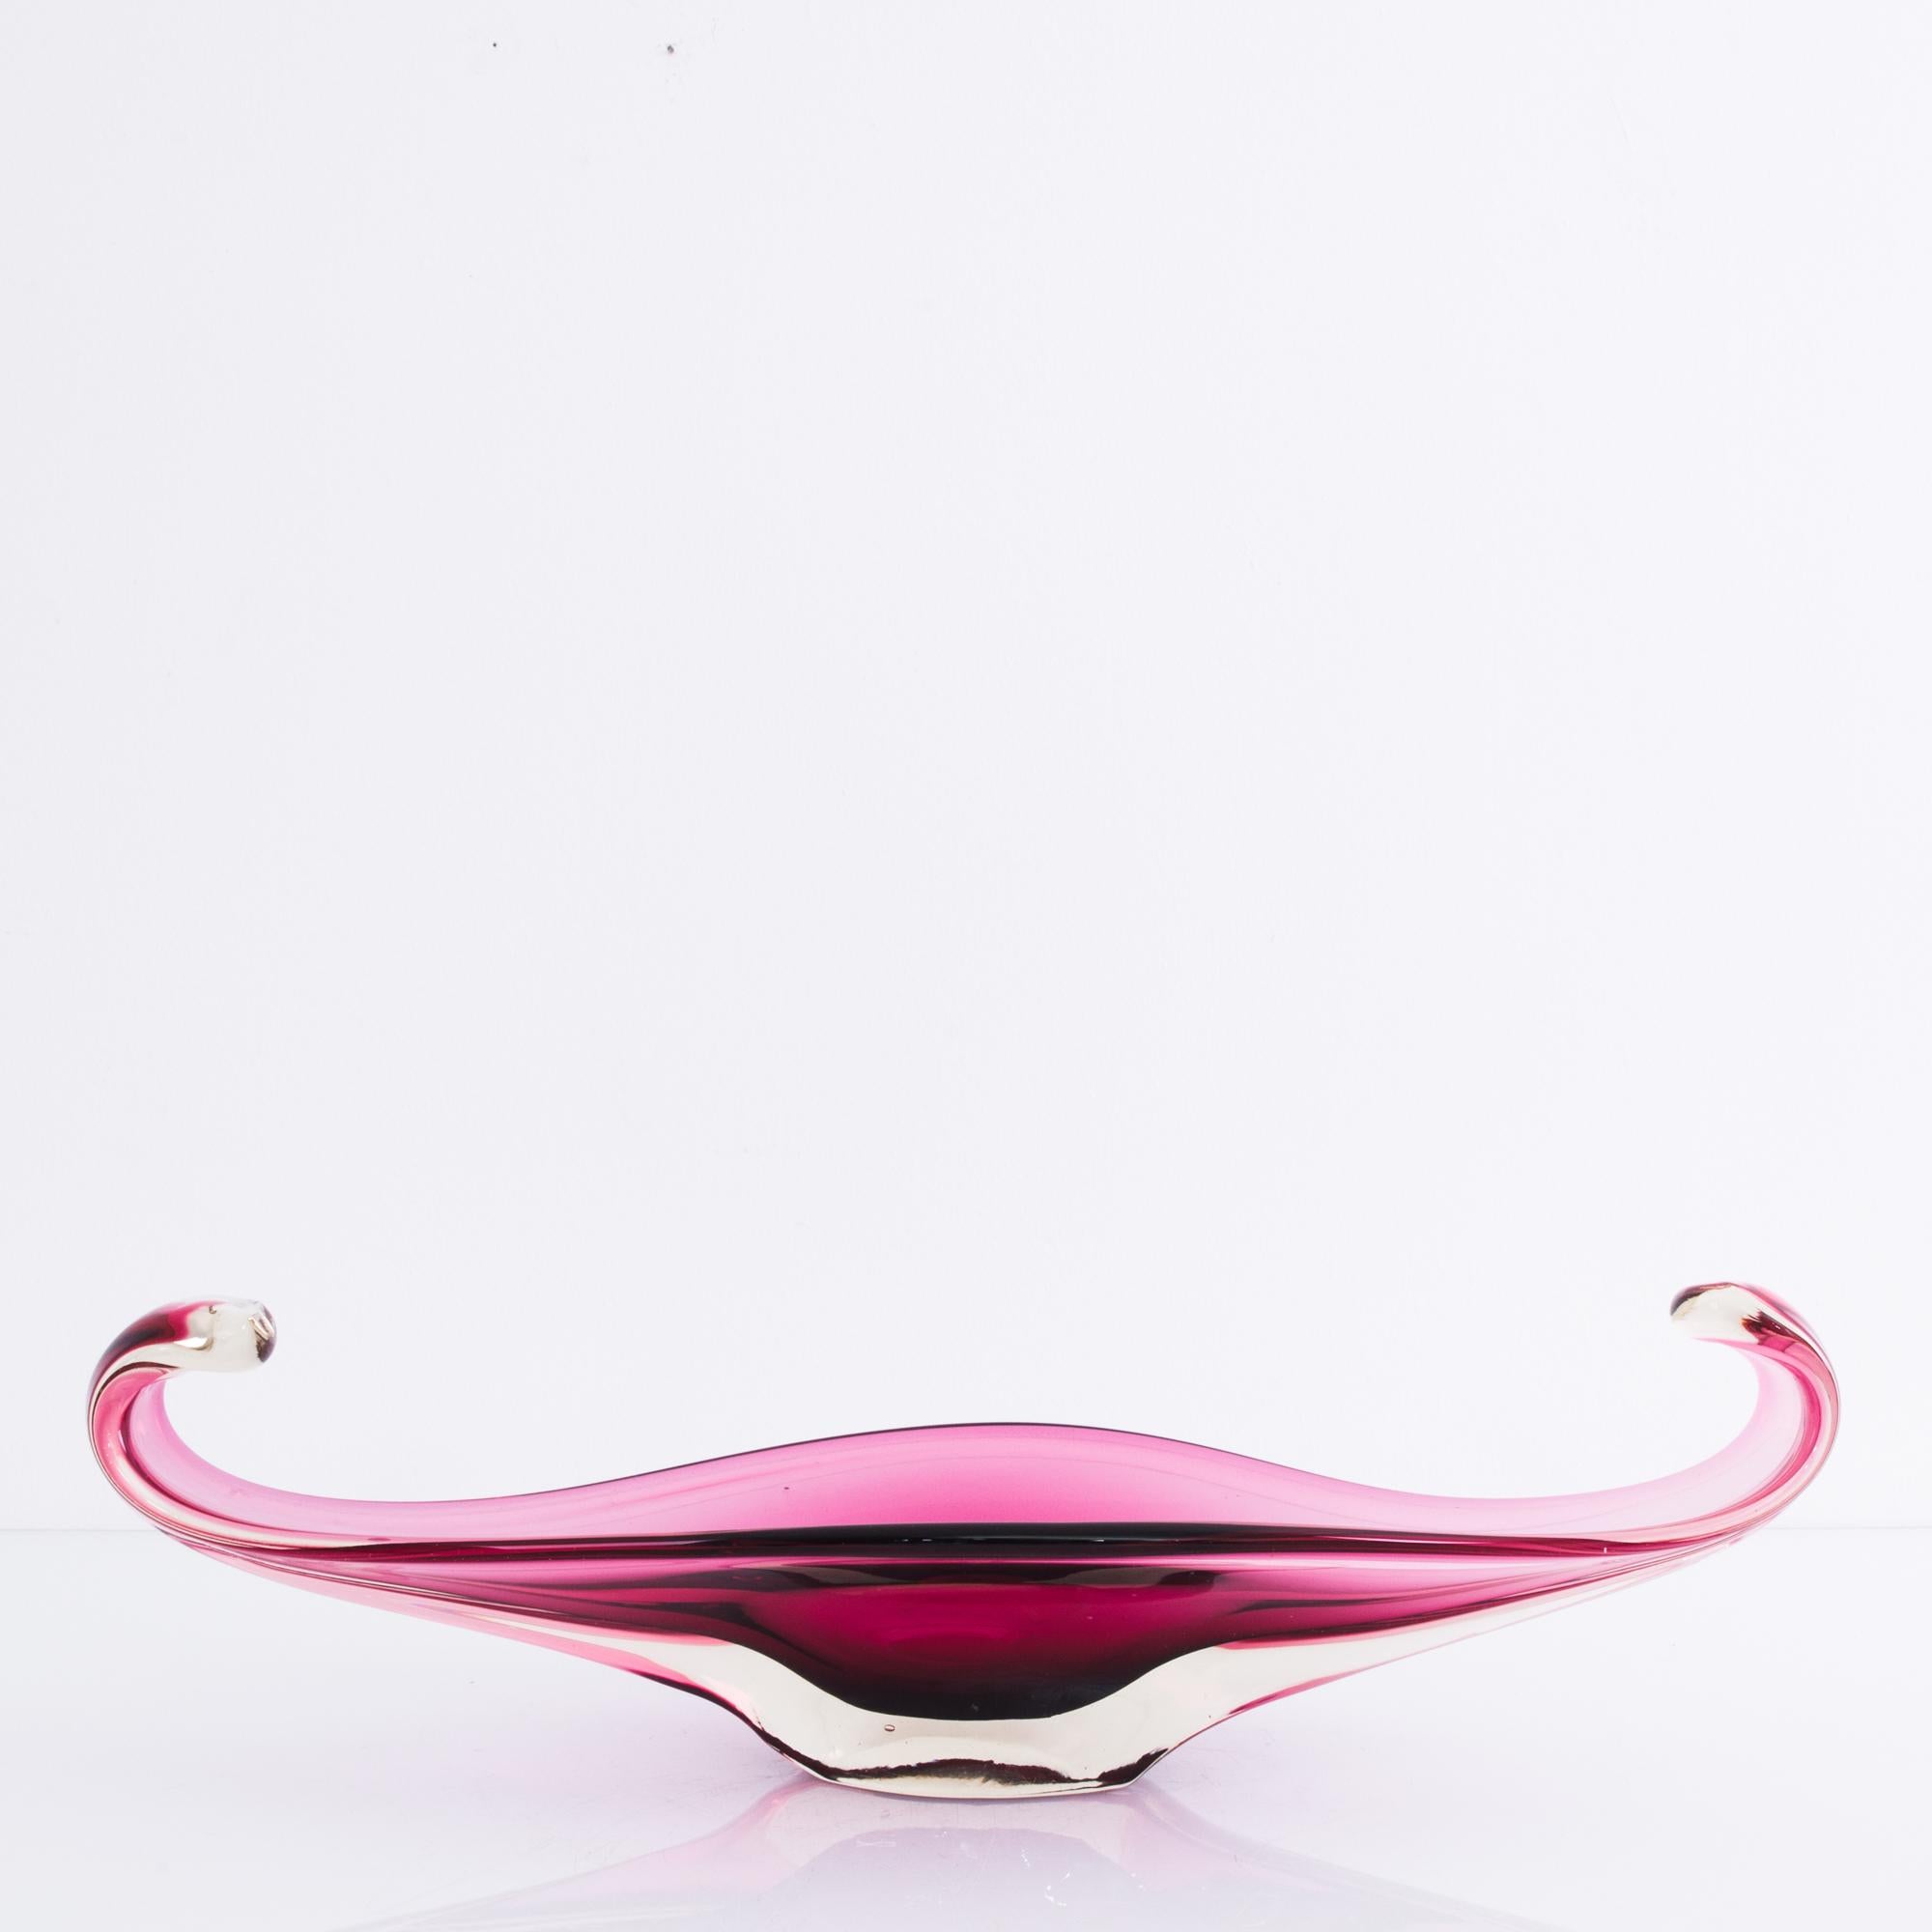 A glass bowl from Belgium, produced circa 1960. An elegant, hand blown decorative glass bowl in a rich magenta color. Sat upon the table like the symbolic divine chalice, the sacred feminine, this perfectly balanced piece delights with its shape and